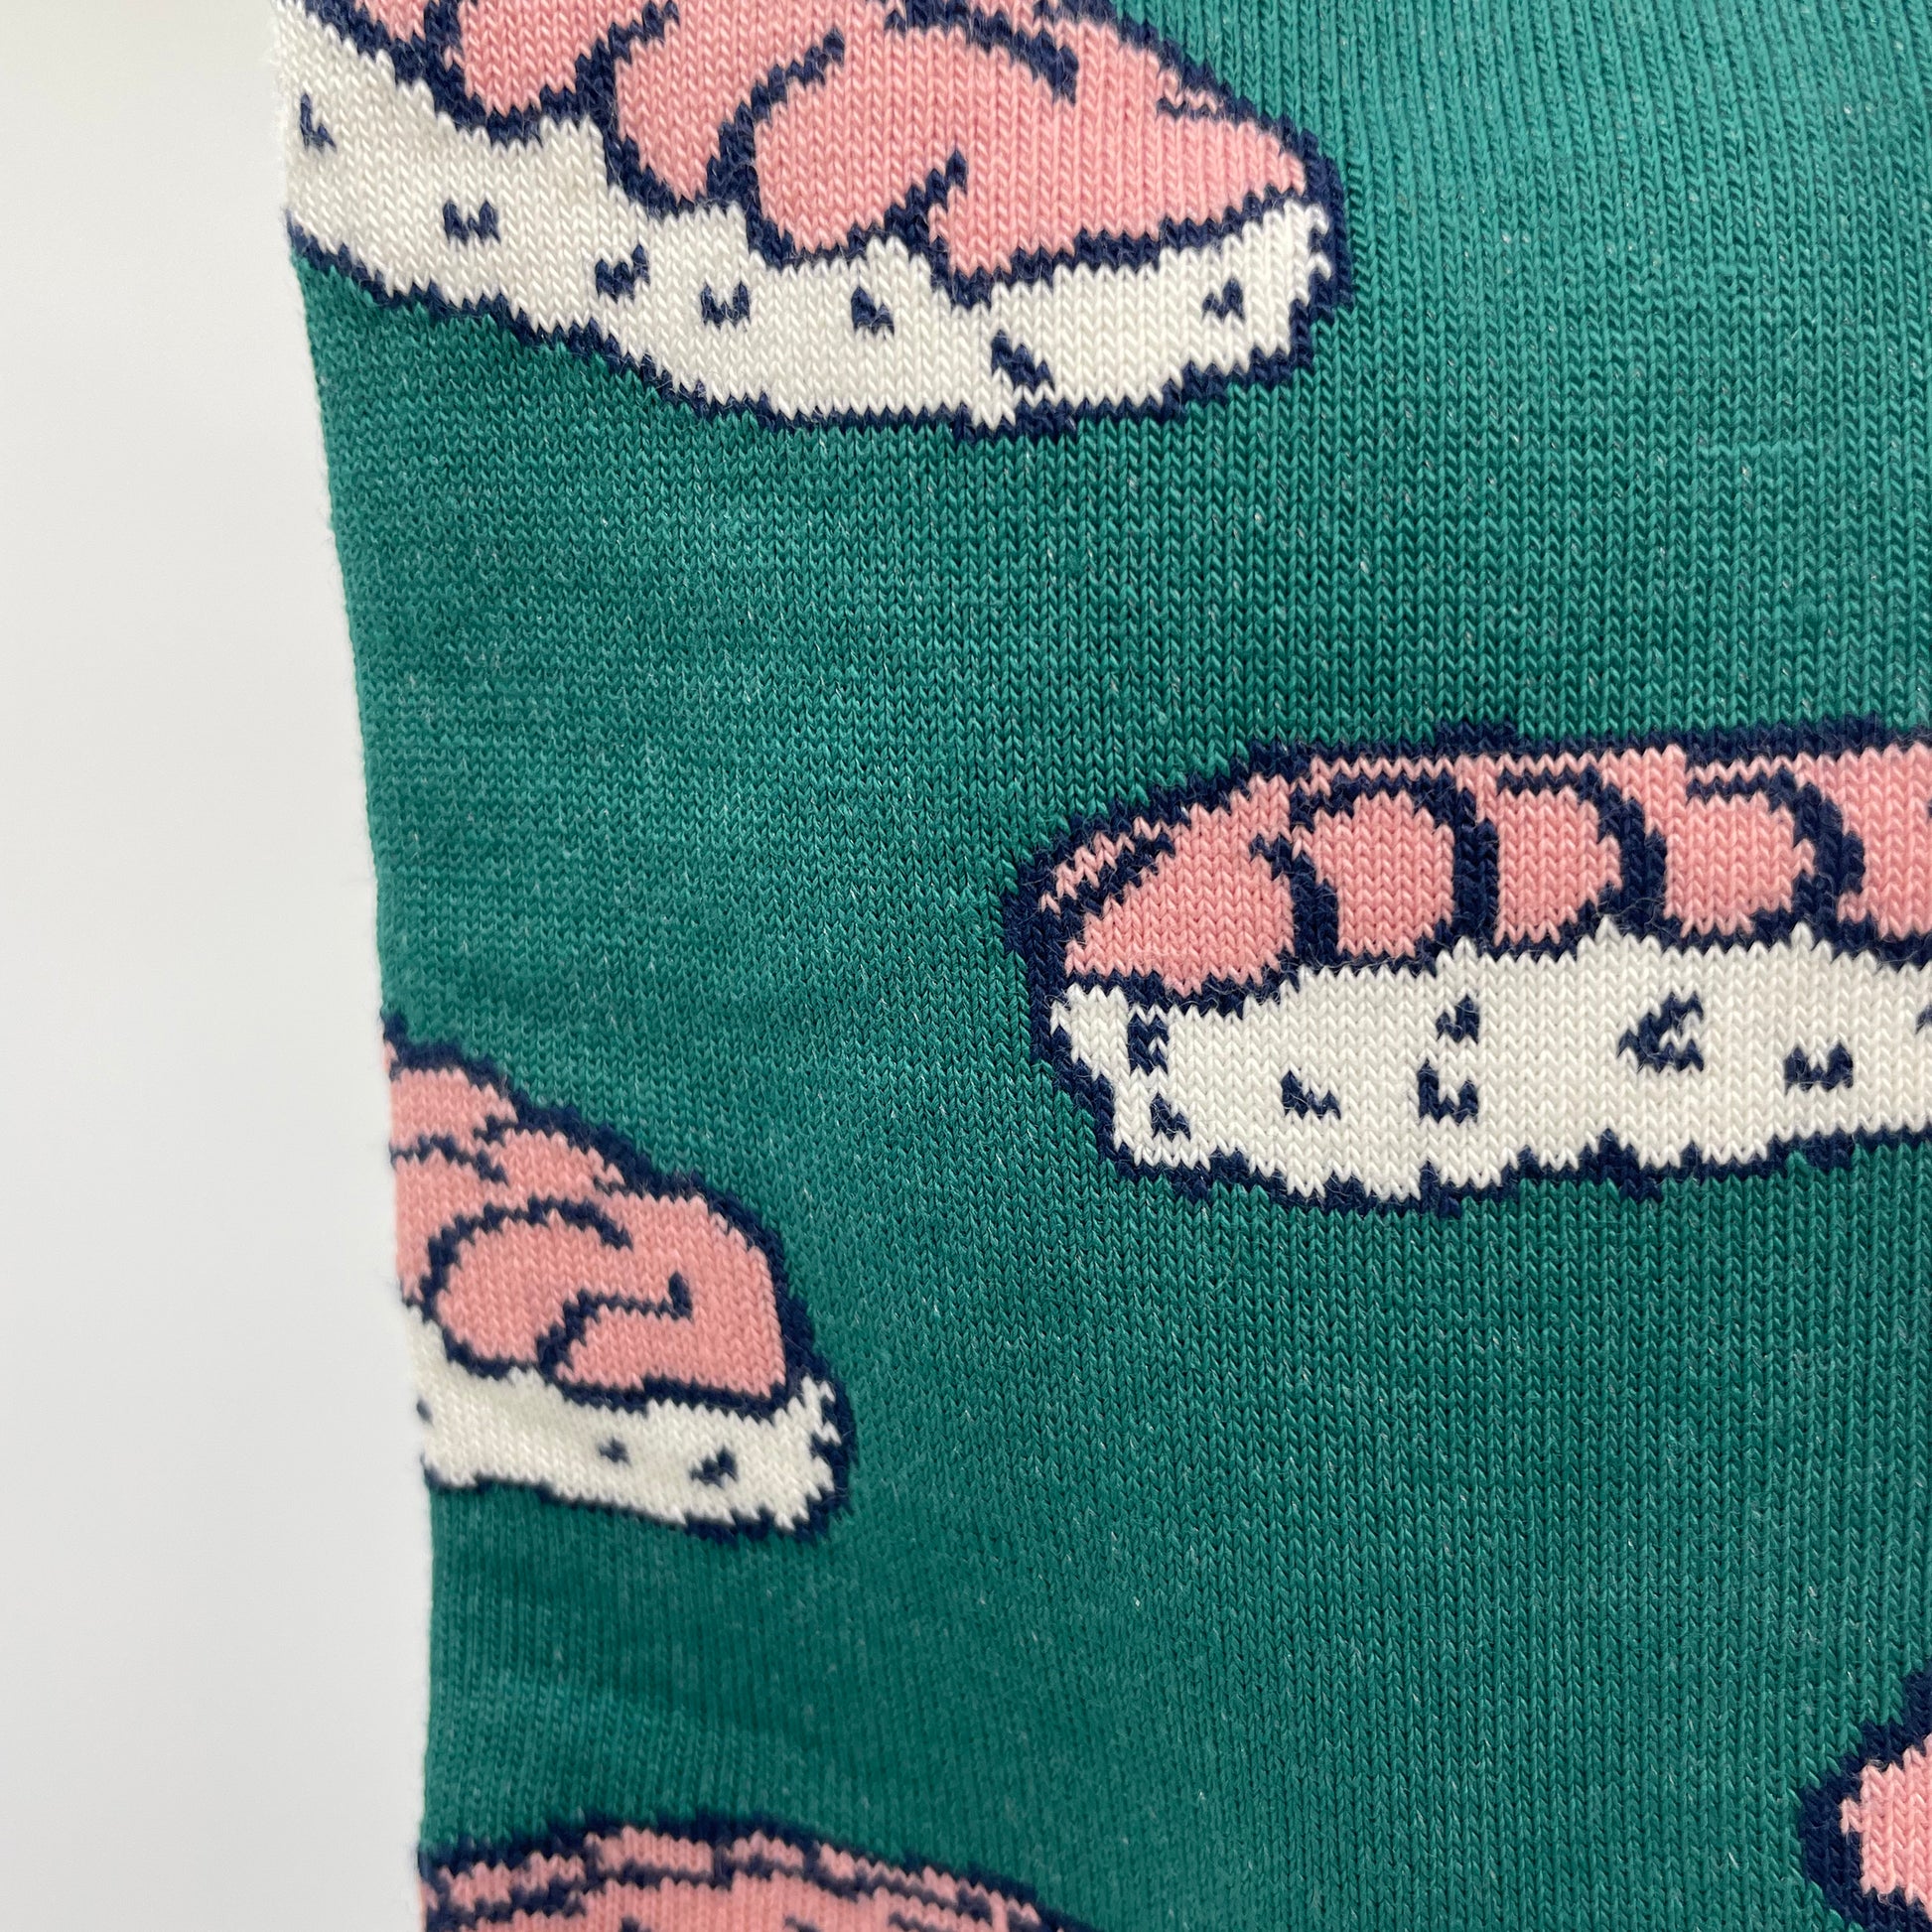 A close-up photo shows detail of a shrimp nigiri pattern woven into teal organic cotton socks.